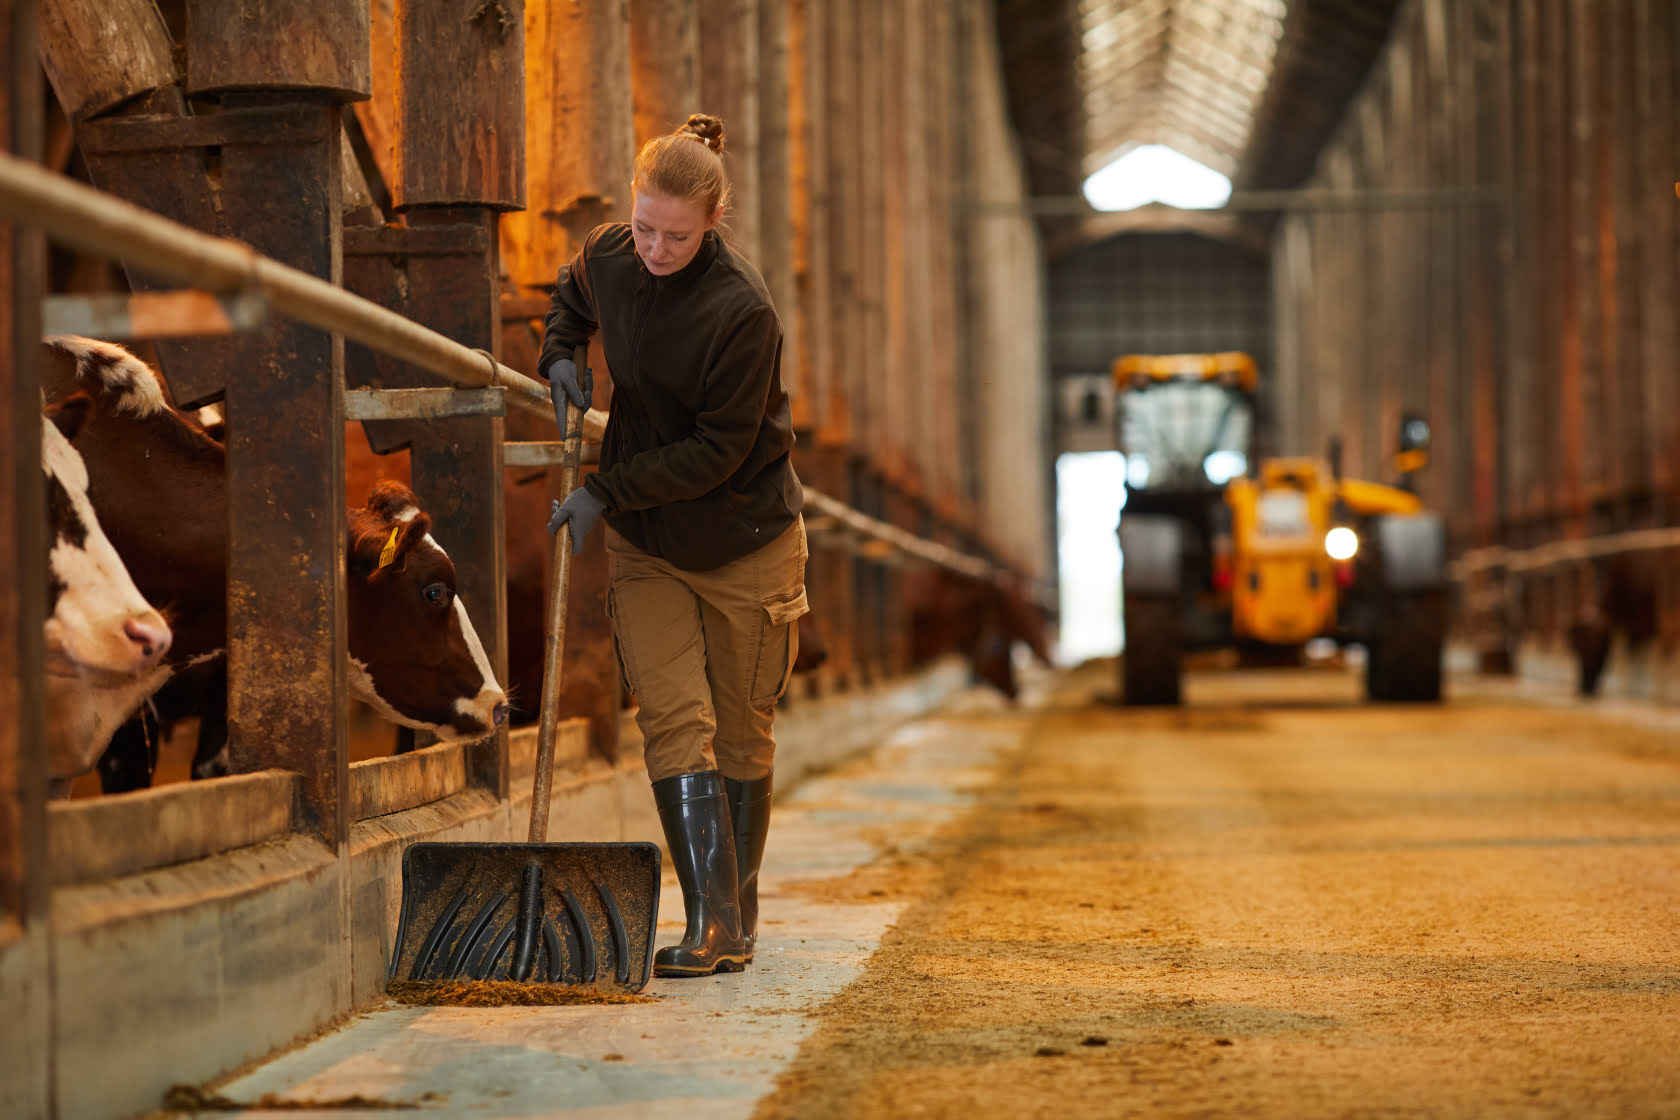 Remove all bedding and equipment before cleaning the barn. For rough and porous surfaces, use a broad-spectrum disinfectant with penetration enhancers.